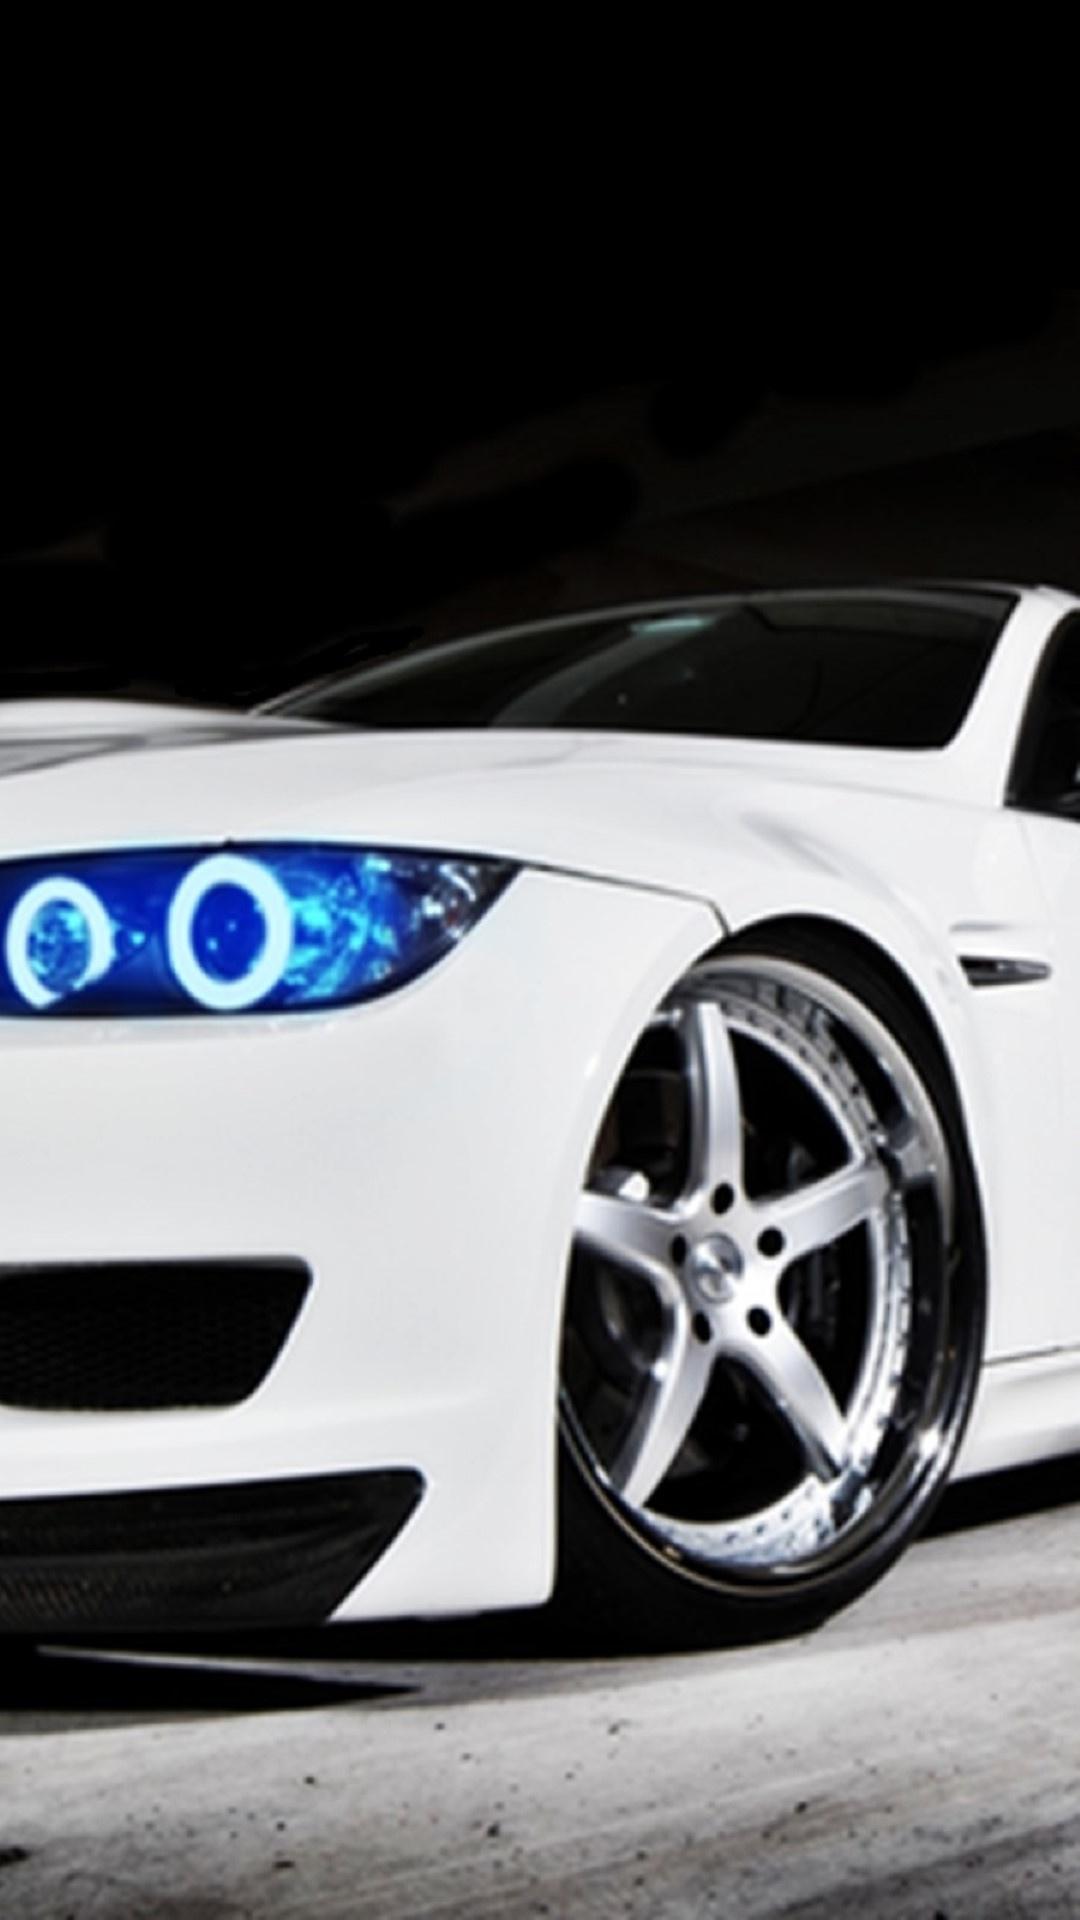 BMW M3 White Blue Lights Android Wallpaper free download